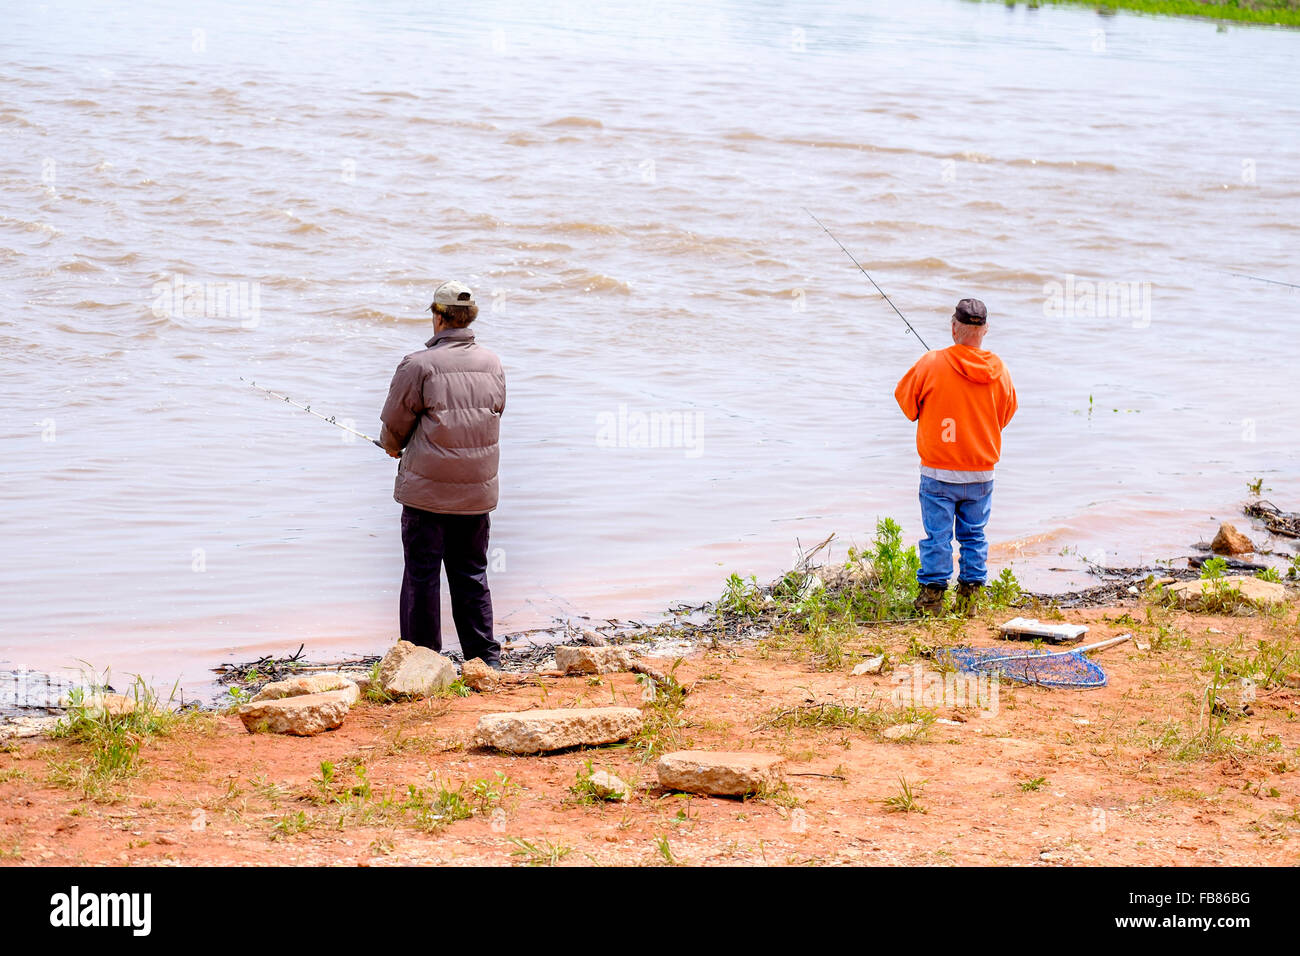 Two men fish in the rising waters of Hefner Lake in Oklahoma City after a spring rain. Oklahoma, USA. Stock Photo